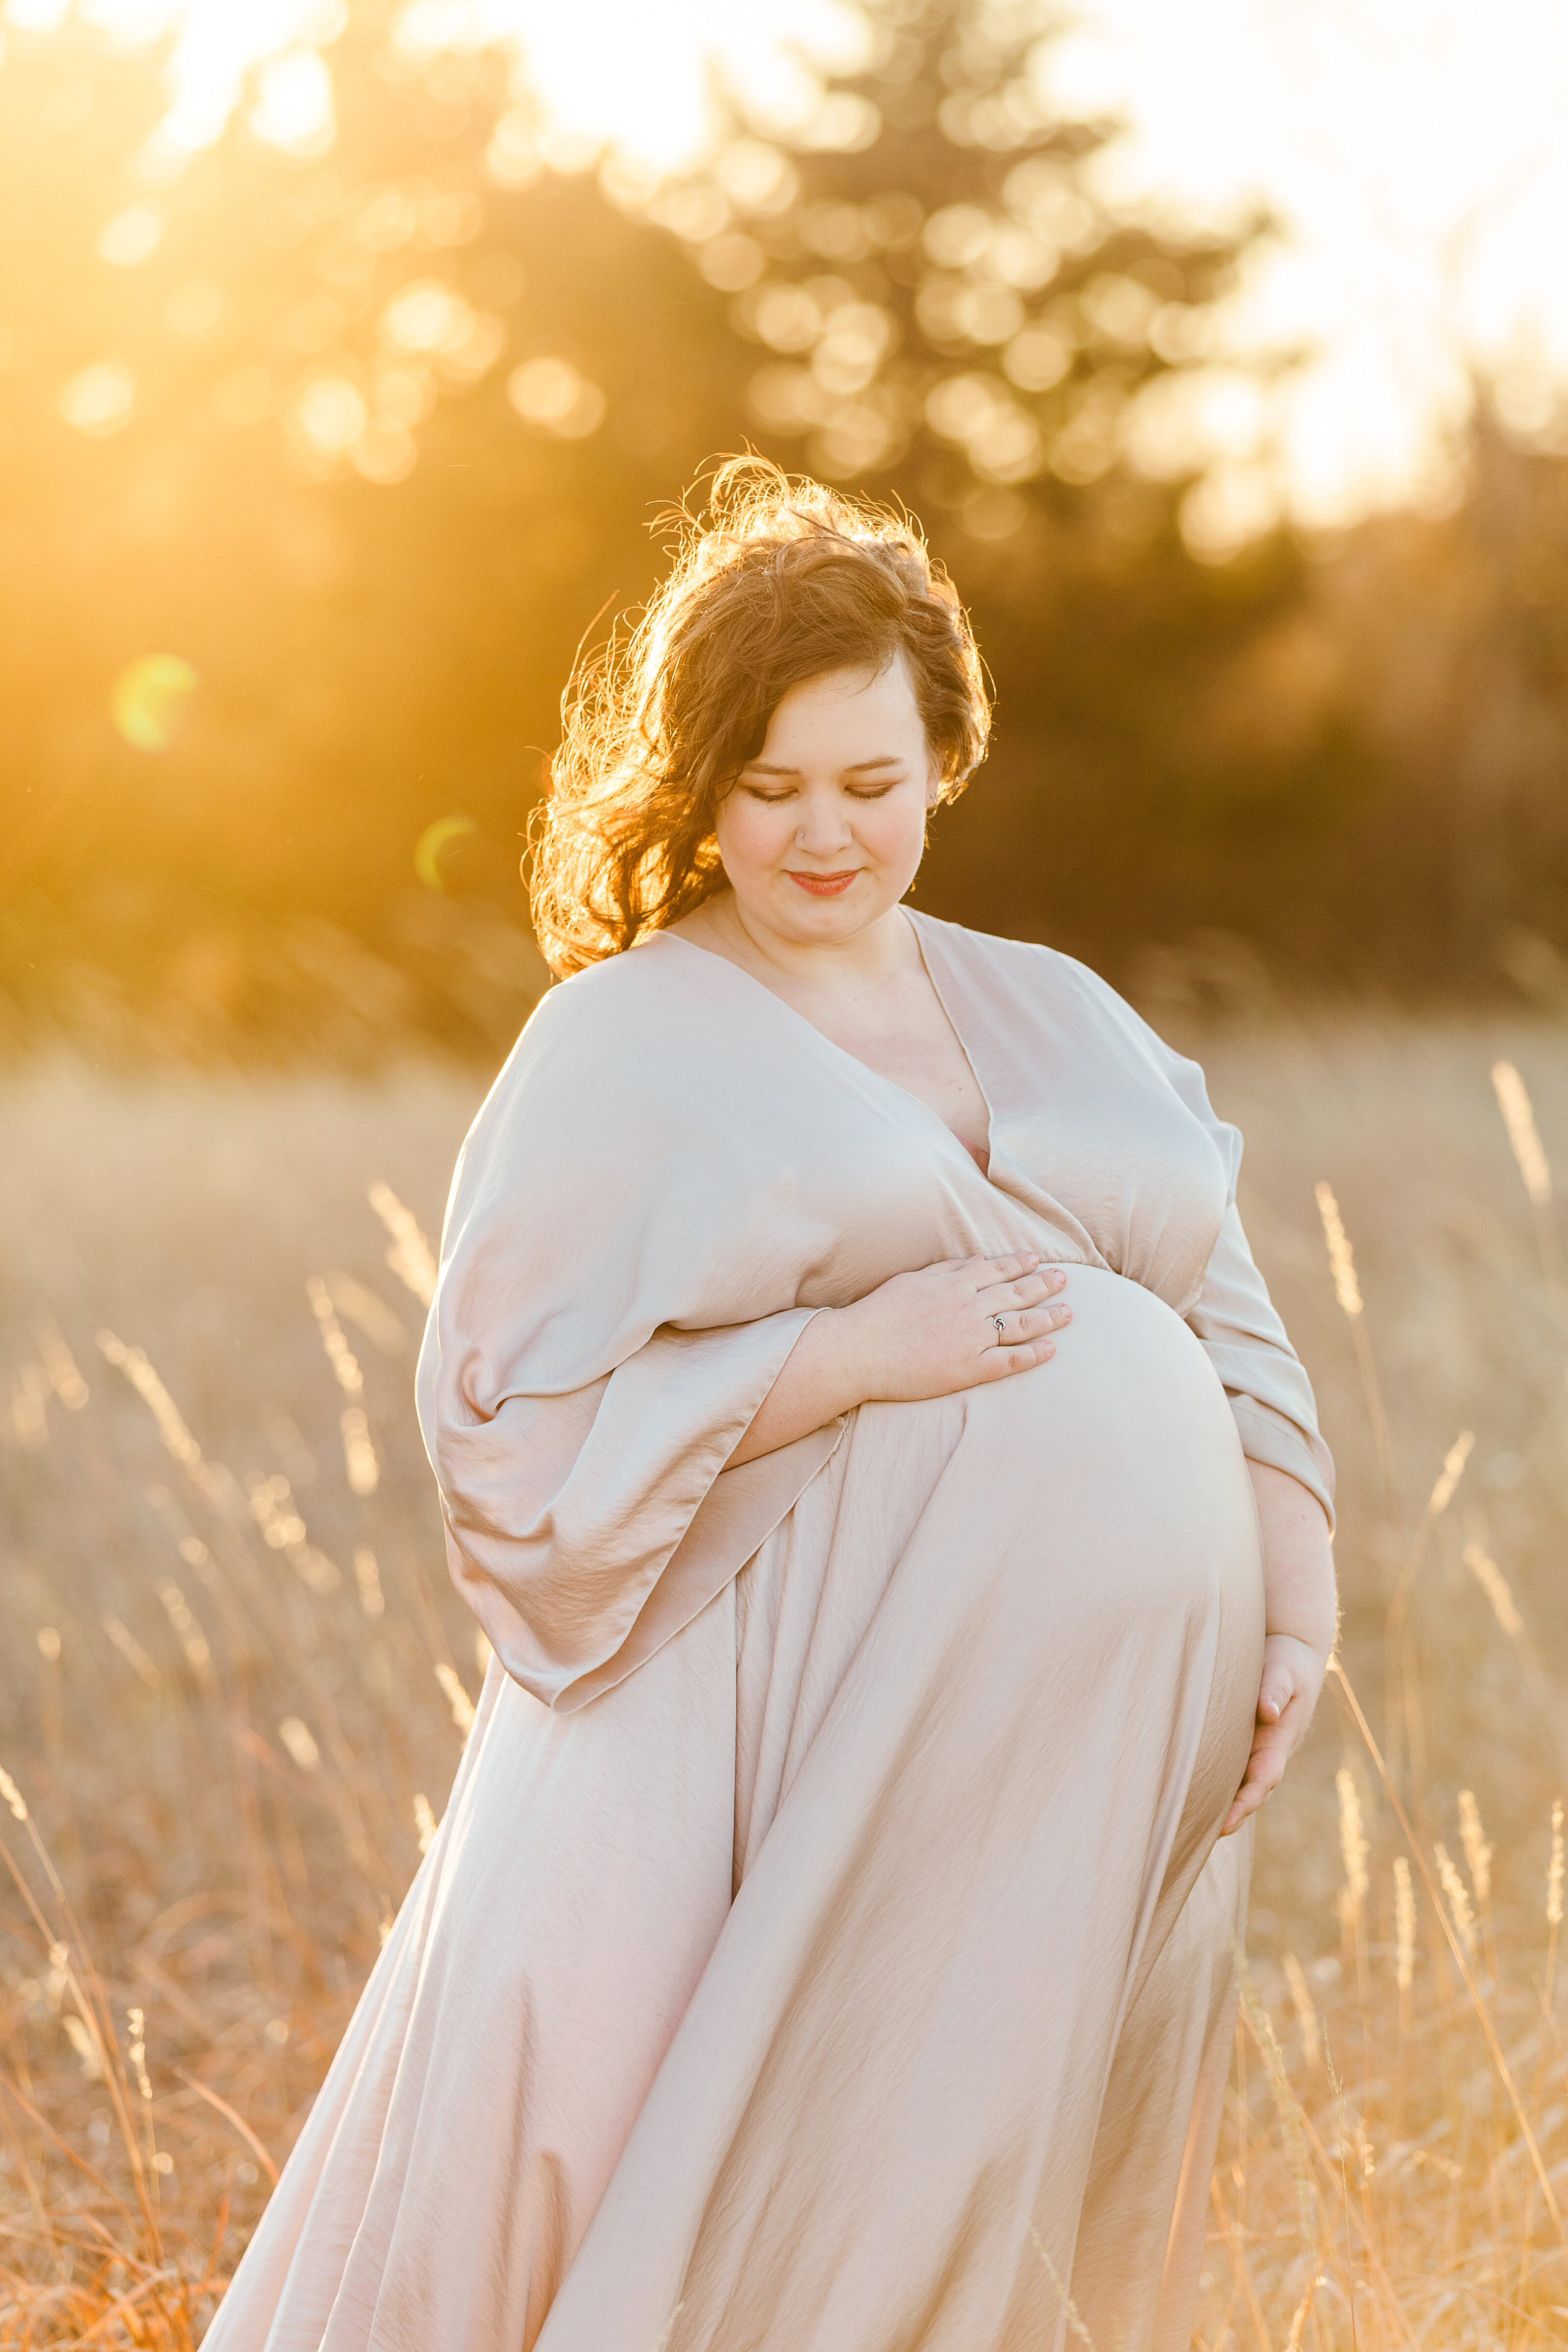 jeanizecilliersphotography-MATERNITY-188